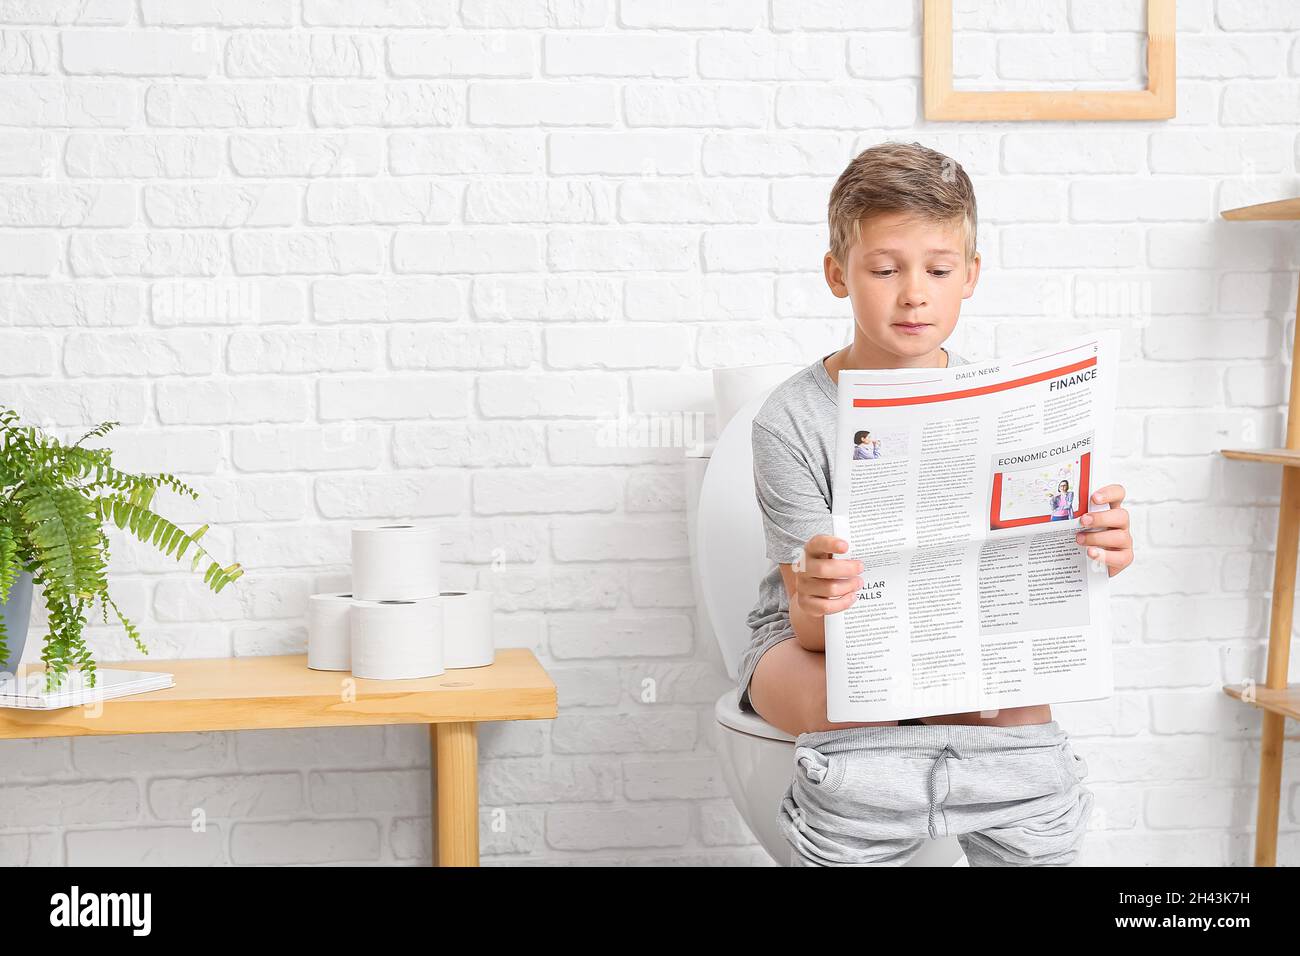 Little boy reading newspaper while sitting on toilet bowl in bathroom Stock Photo